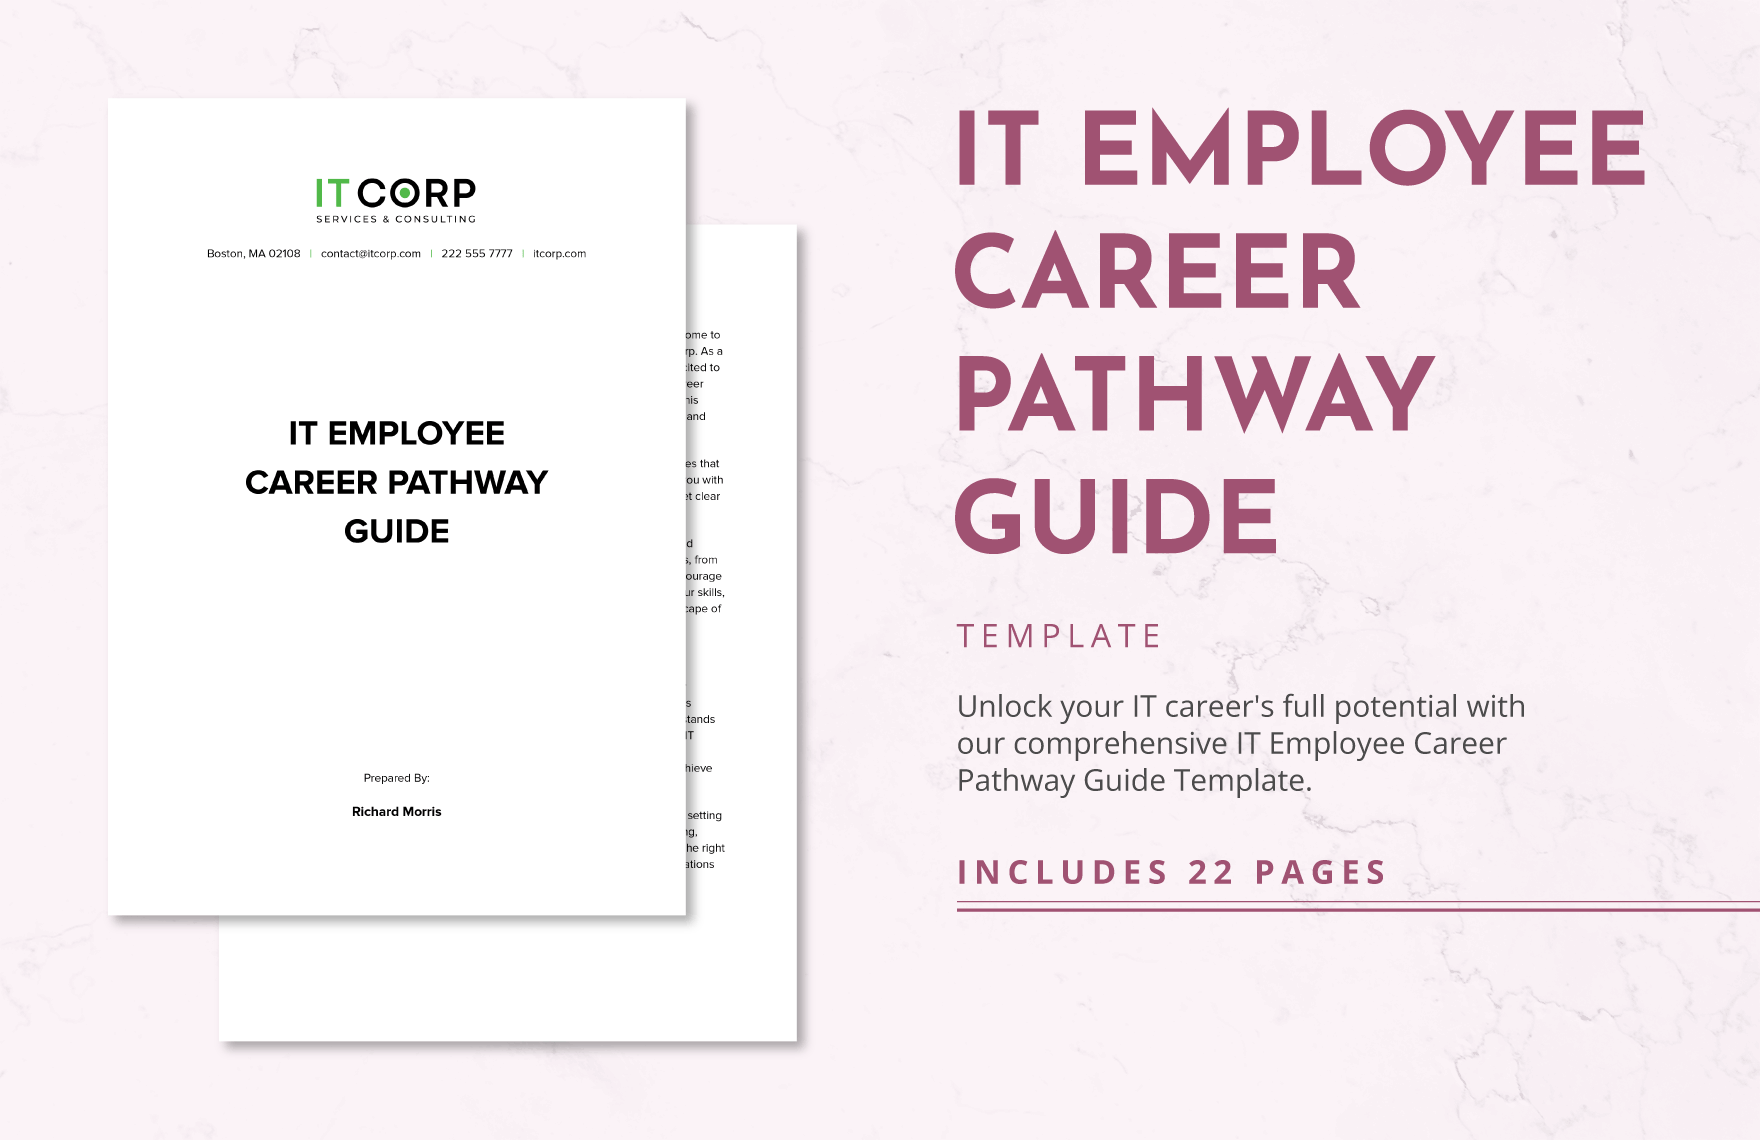 IT Employee Career Pathway Guide Template